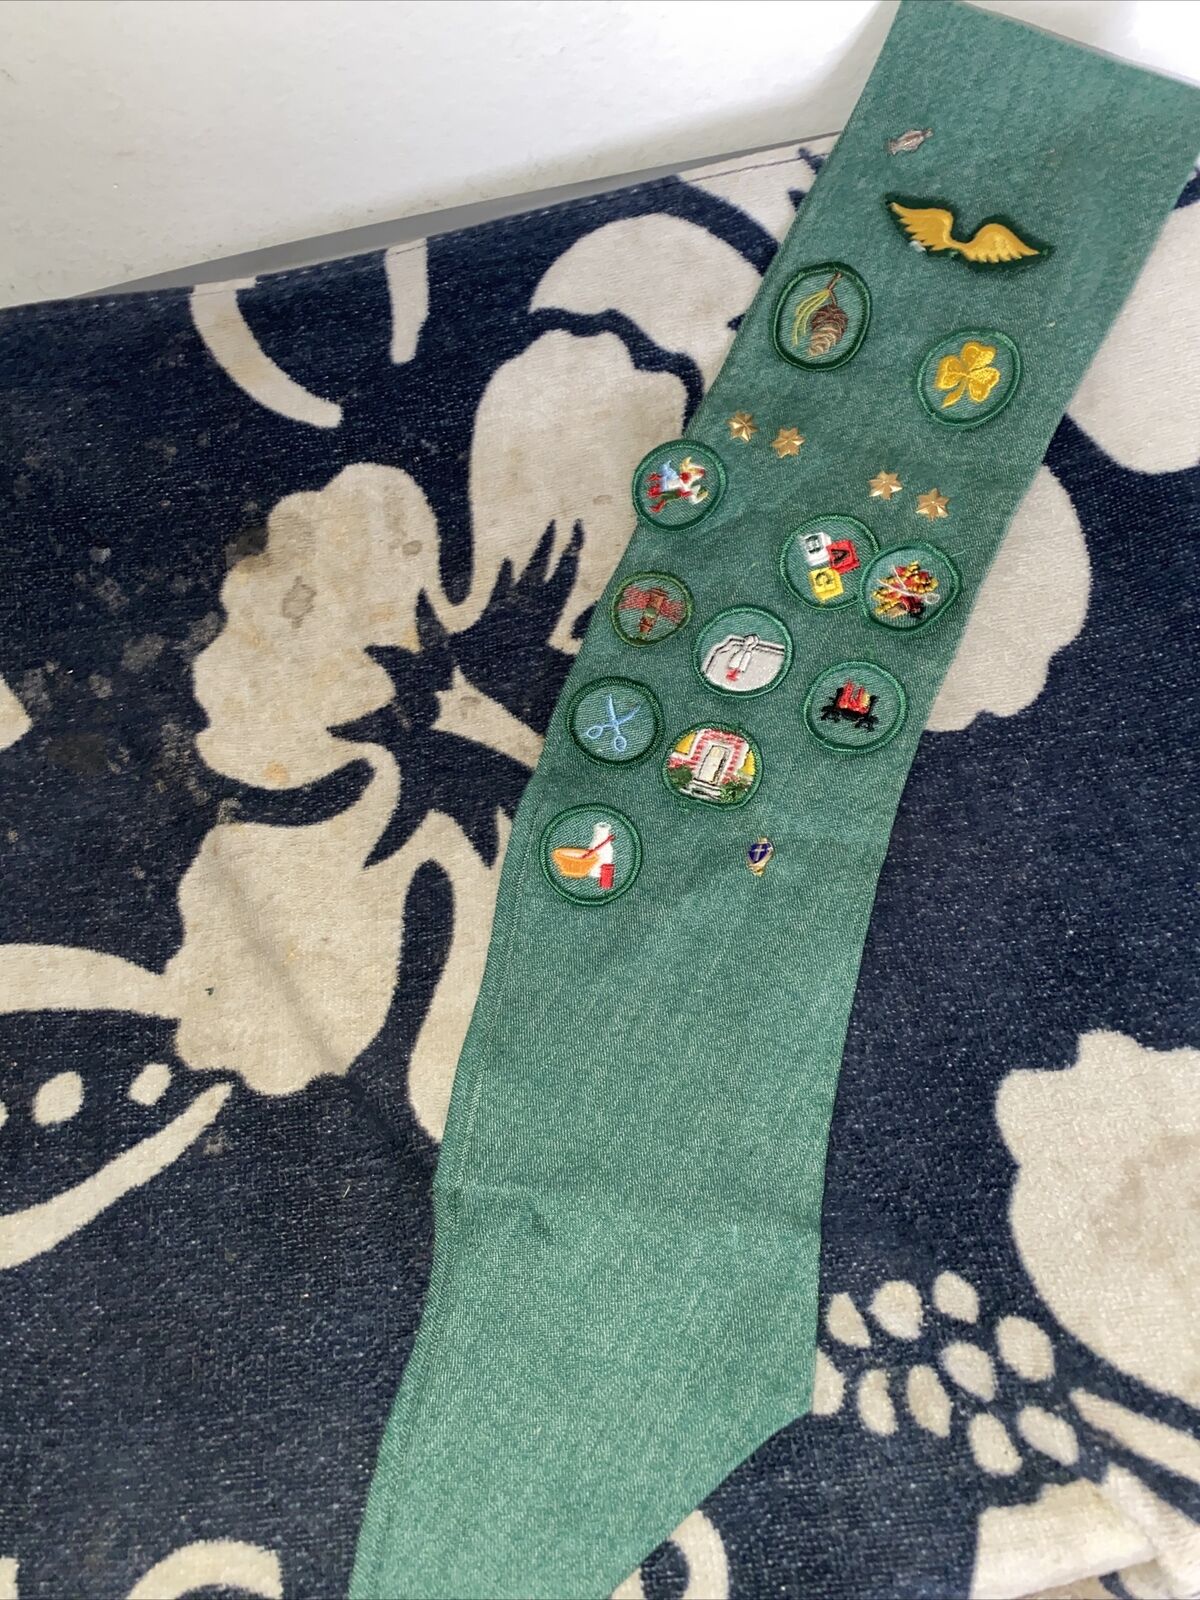 1960-70s Girl Scout vintage sash with badges Patches Pins